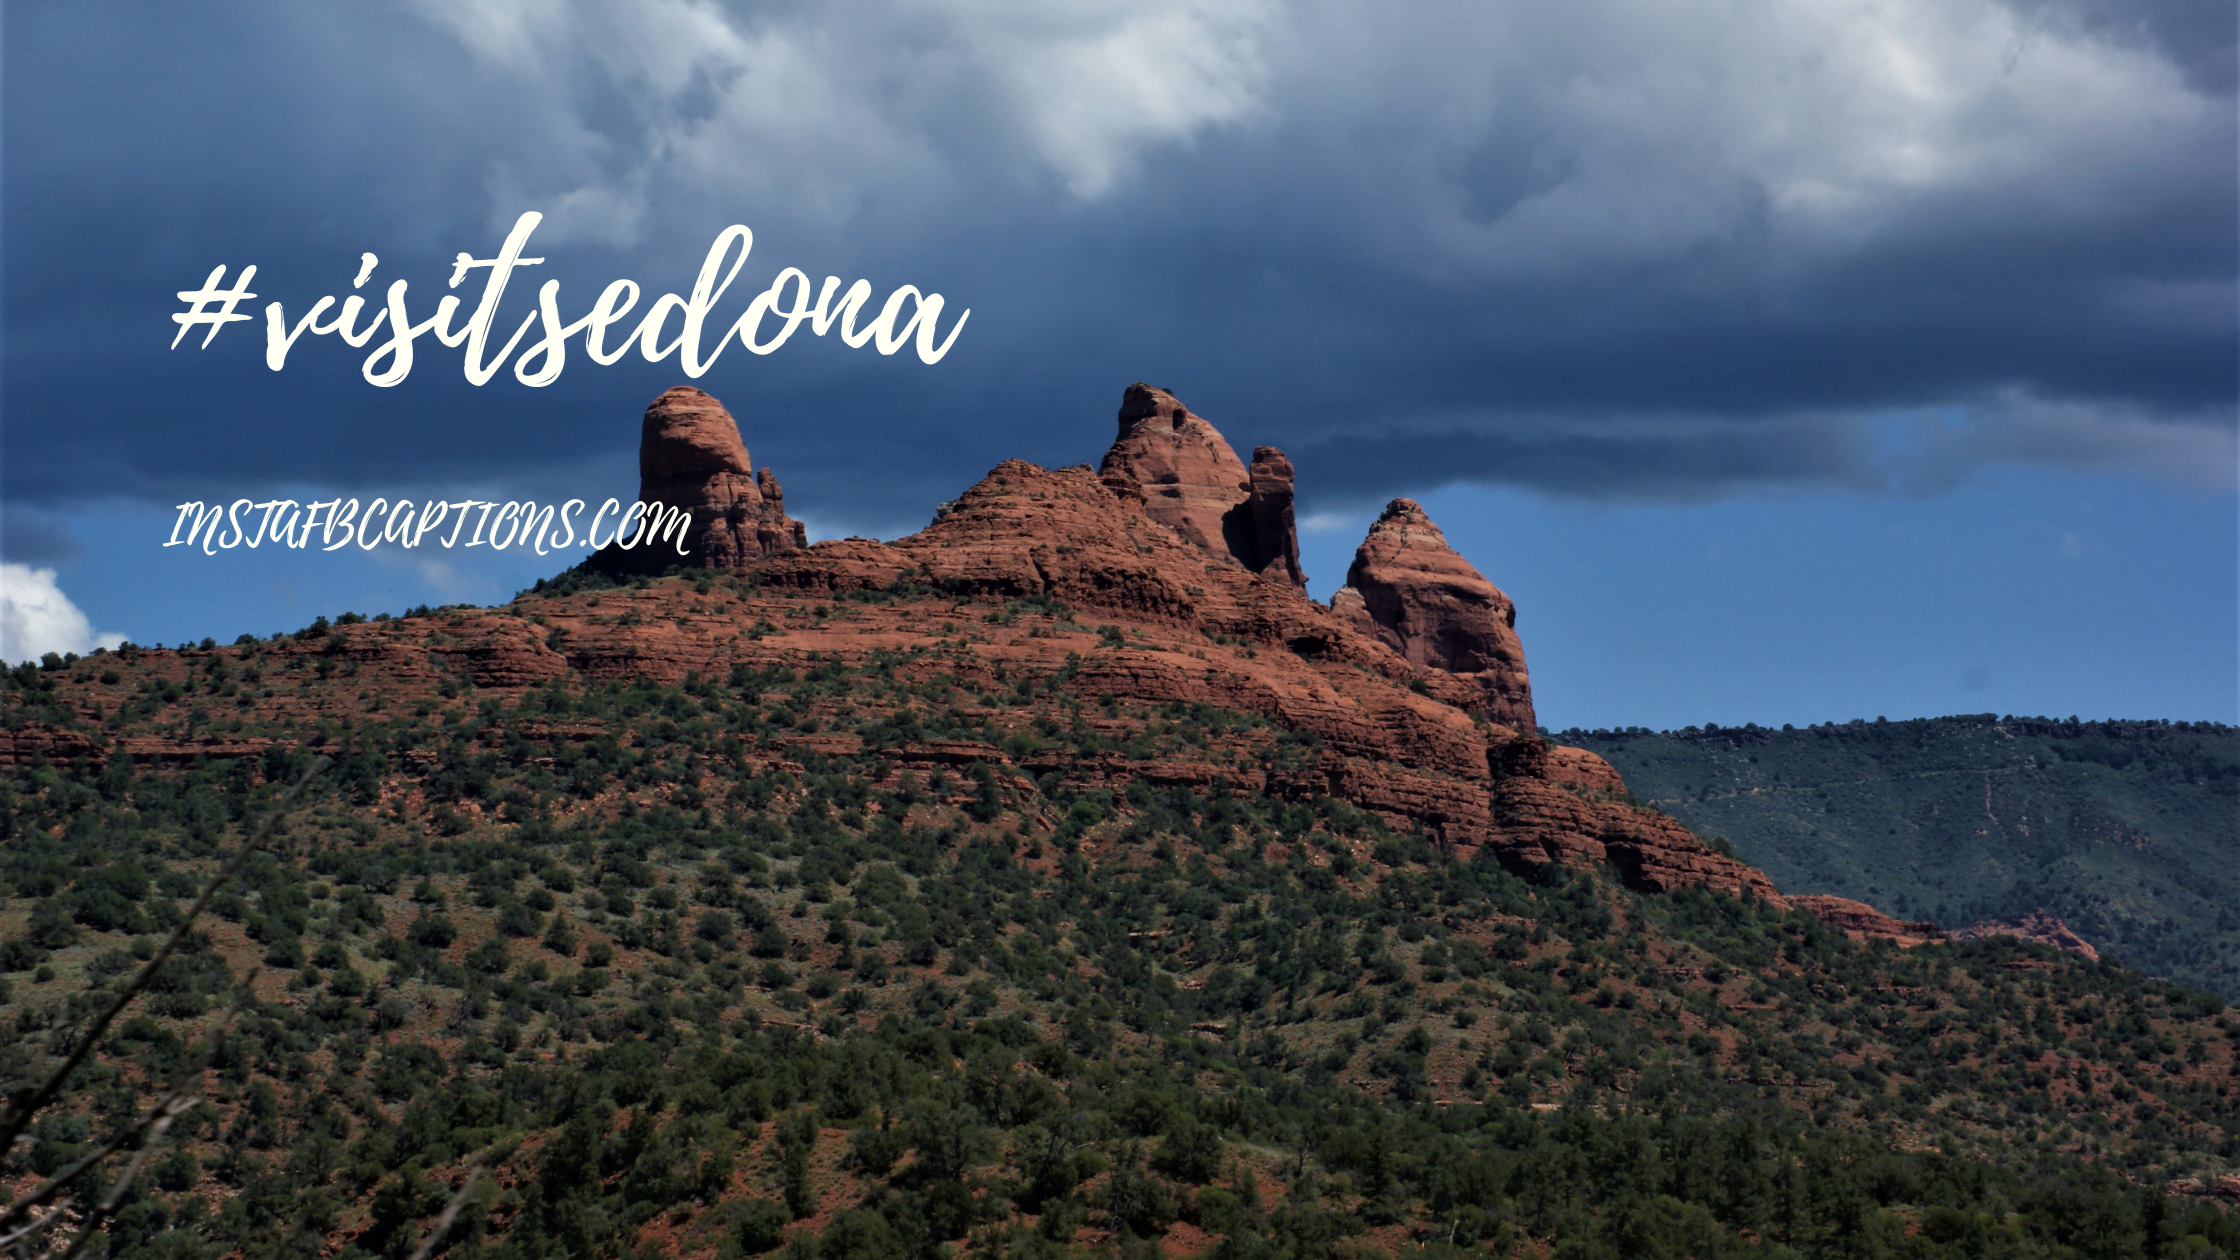 Sedona Hashtags  - Sedona Hashtags  - 128 Sedona Instagram Captions for Vacation in 2022